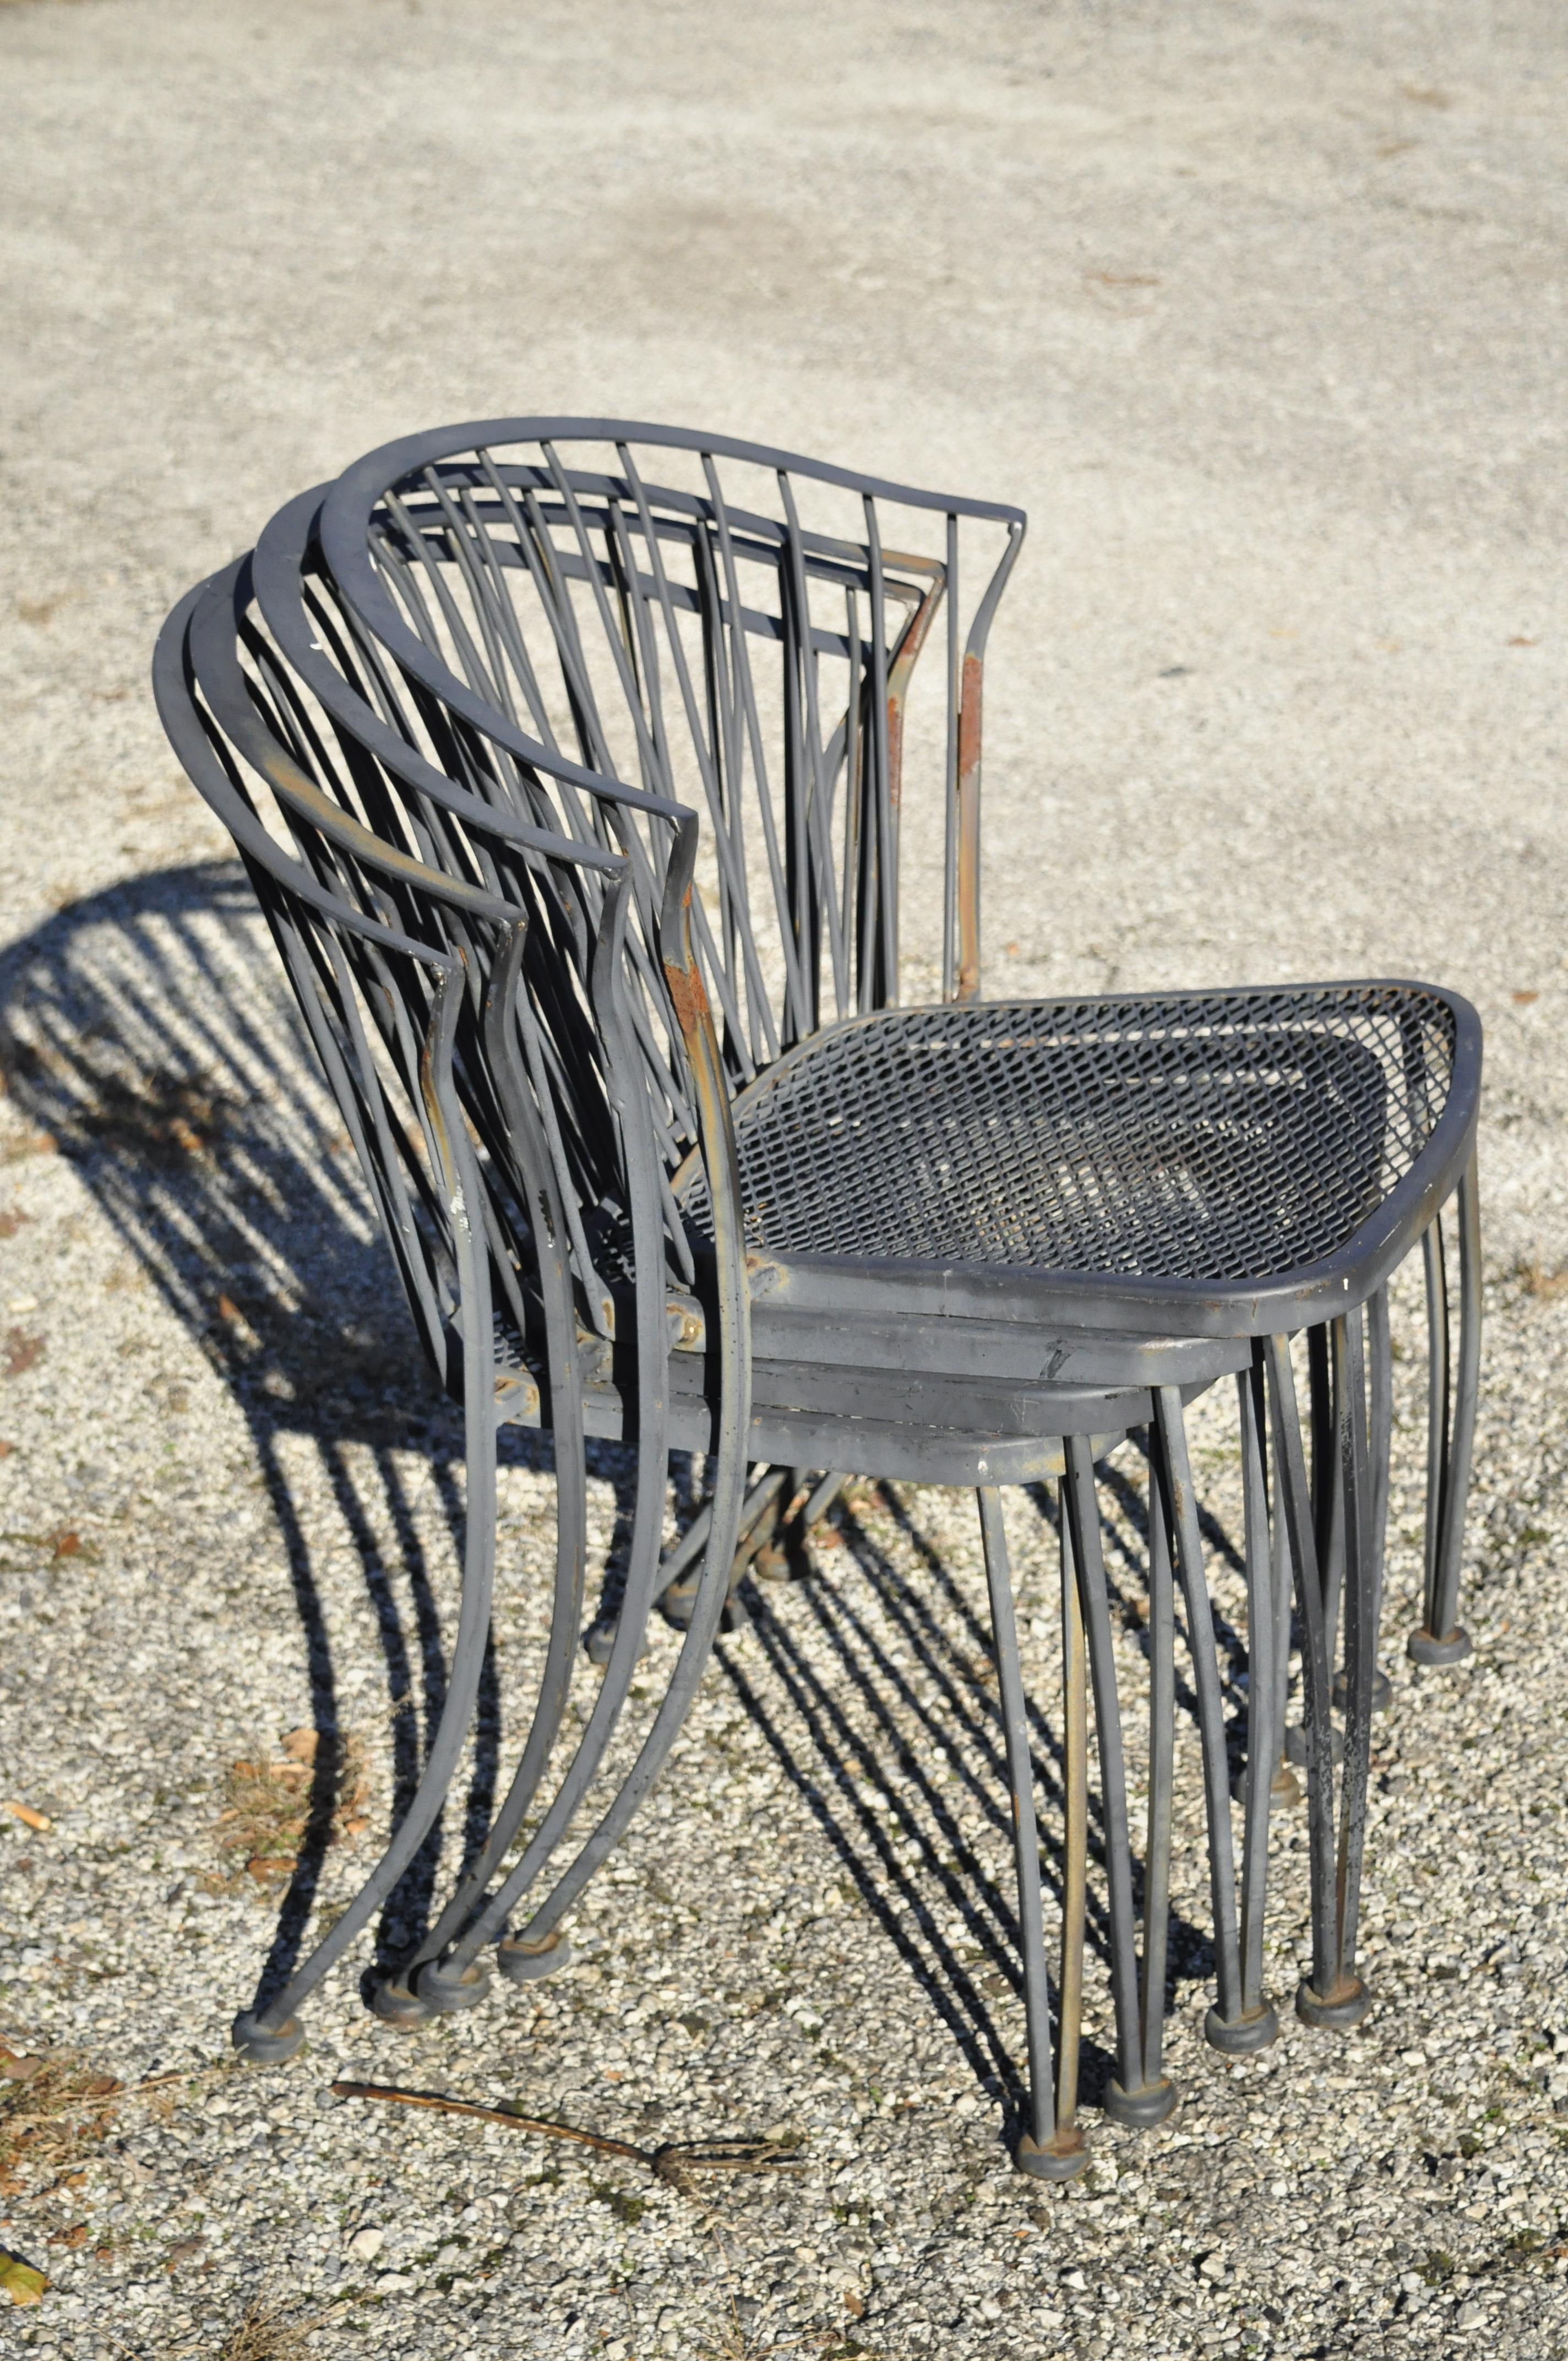 Vintage Carolina Forge wrought iron barrel back midcentury Patio chairs - Set of 4. Item features stacking frames, wrought iron construction, original tag, very nice vintage set, great style and form, circa mid-late 20th century. Measurements: 31.5